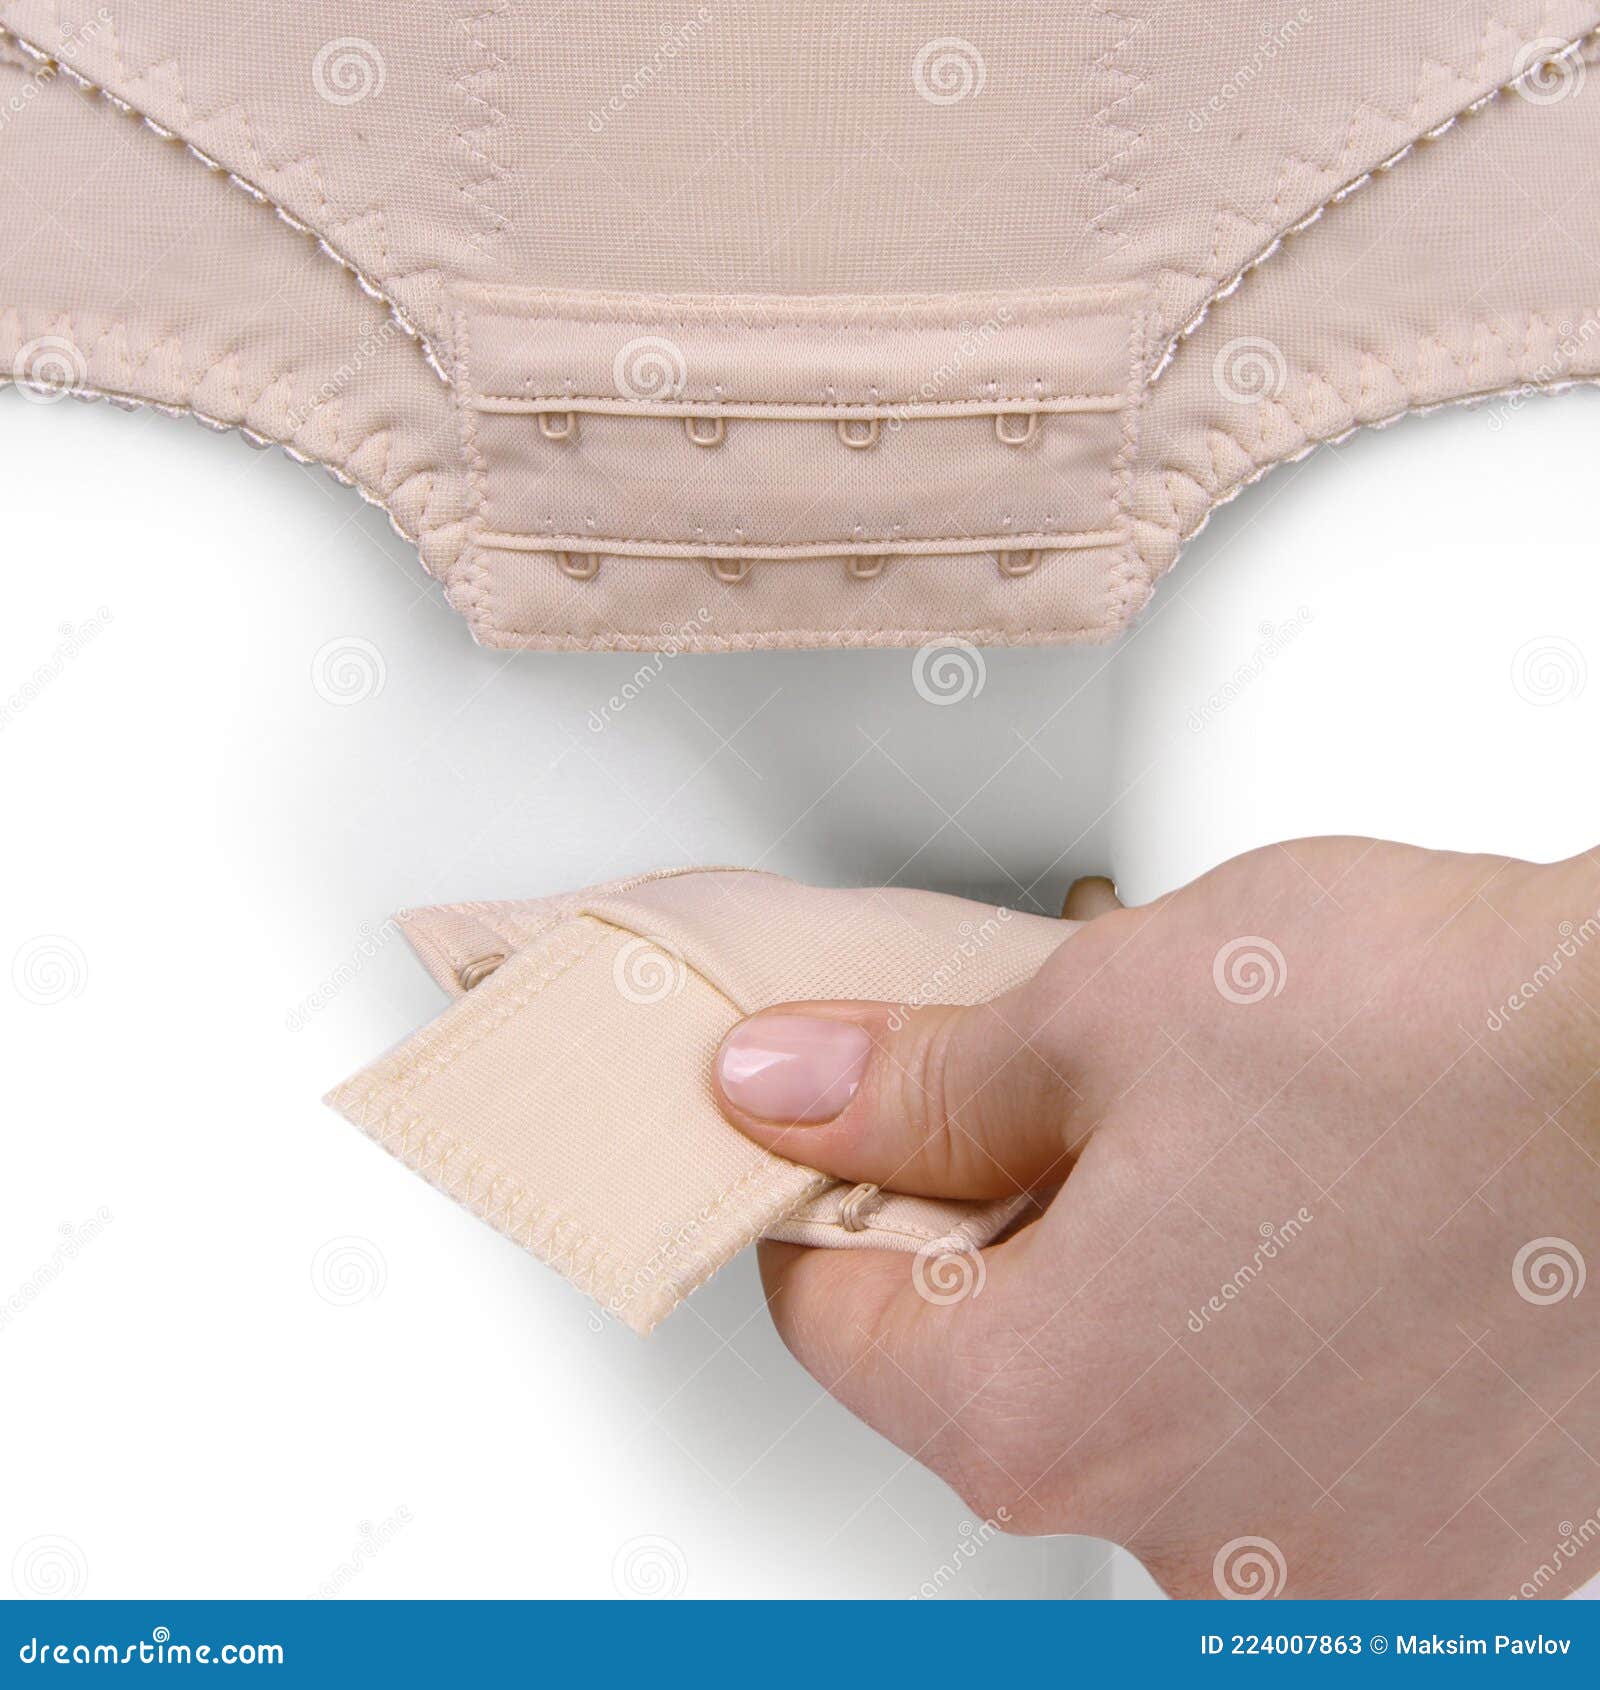 Hook-and-loop Fastening at the Gusset. Postnatal Bandage. Medical  Compression Underwear Stock Image - Image of belly, care: 224007863